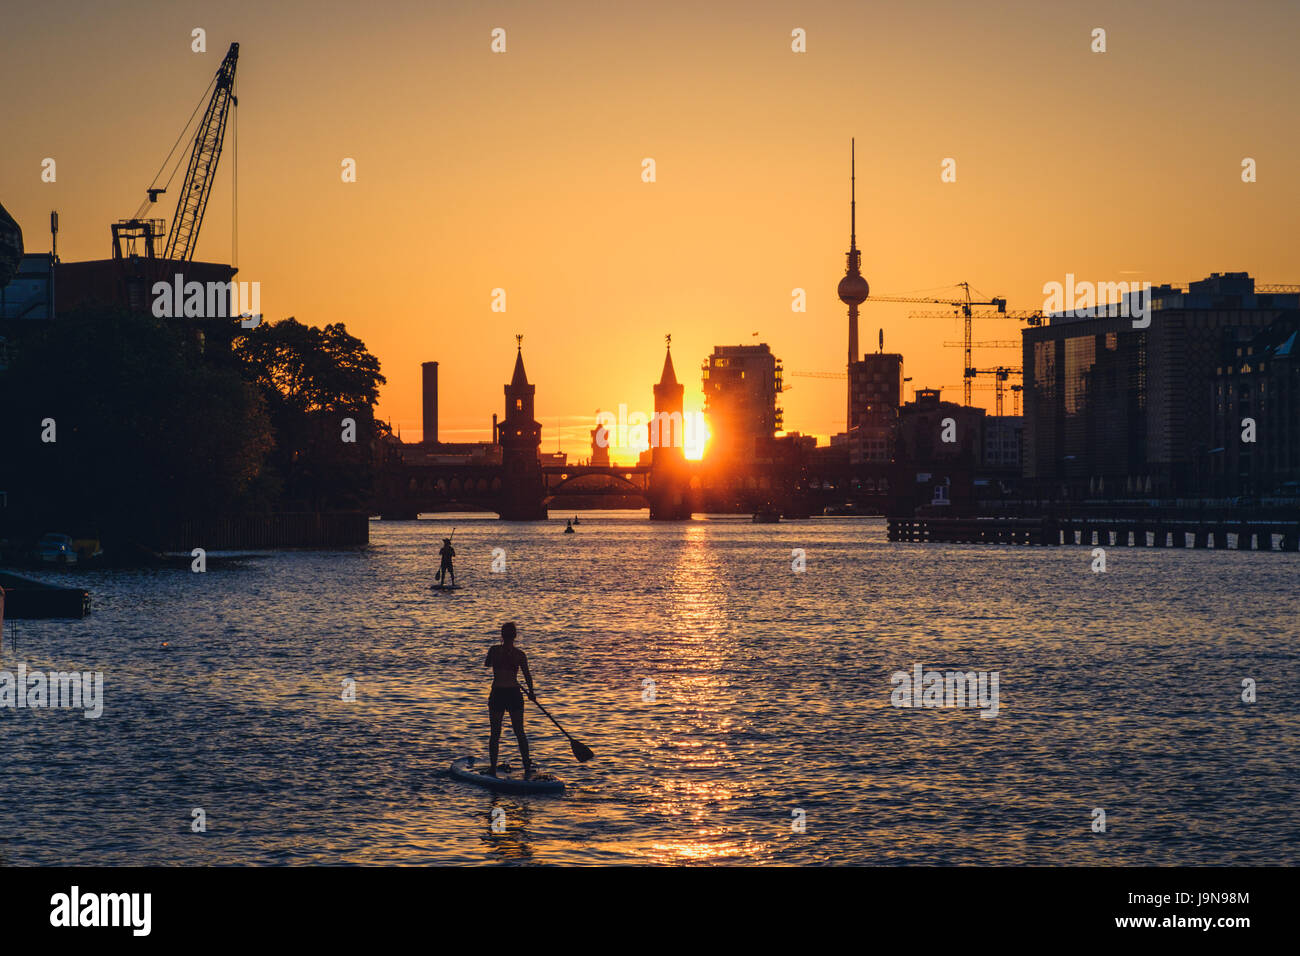 Two stand up paddler on river spree in Berlin - Oberbaum Bridge, Tv Tower and sunset sky background Stock Photo